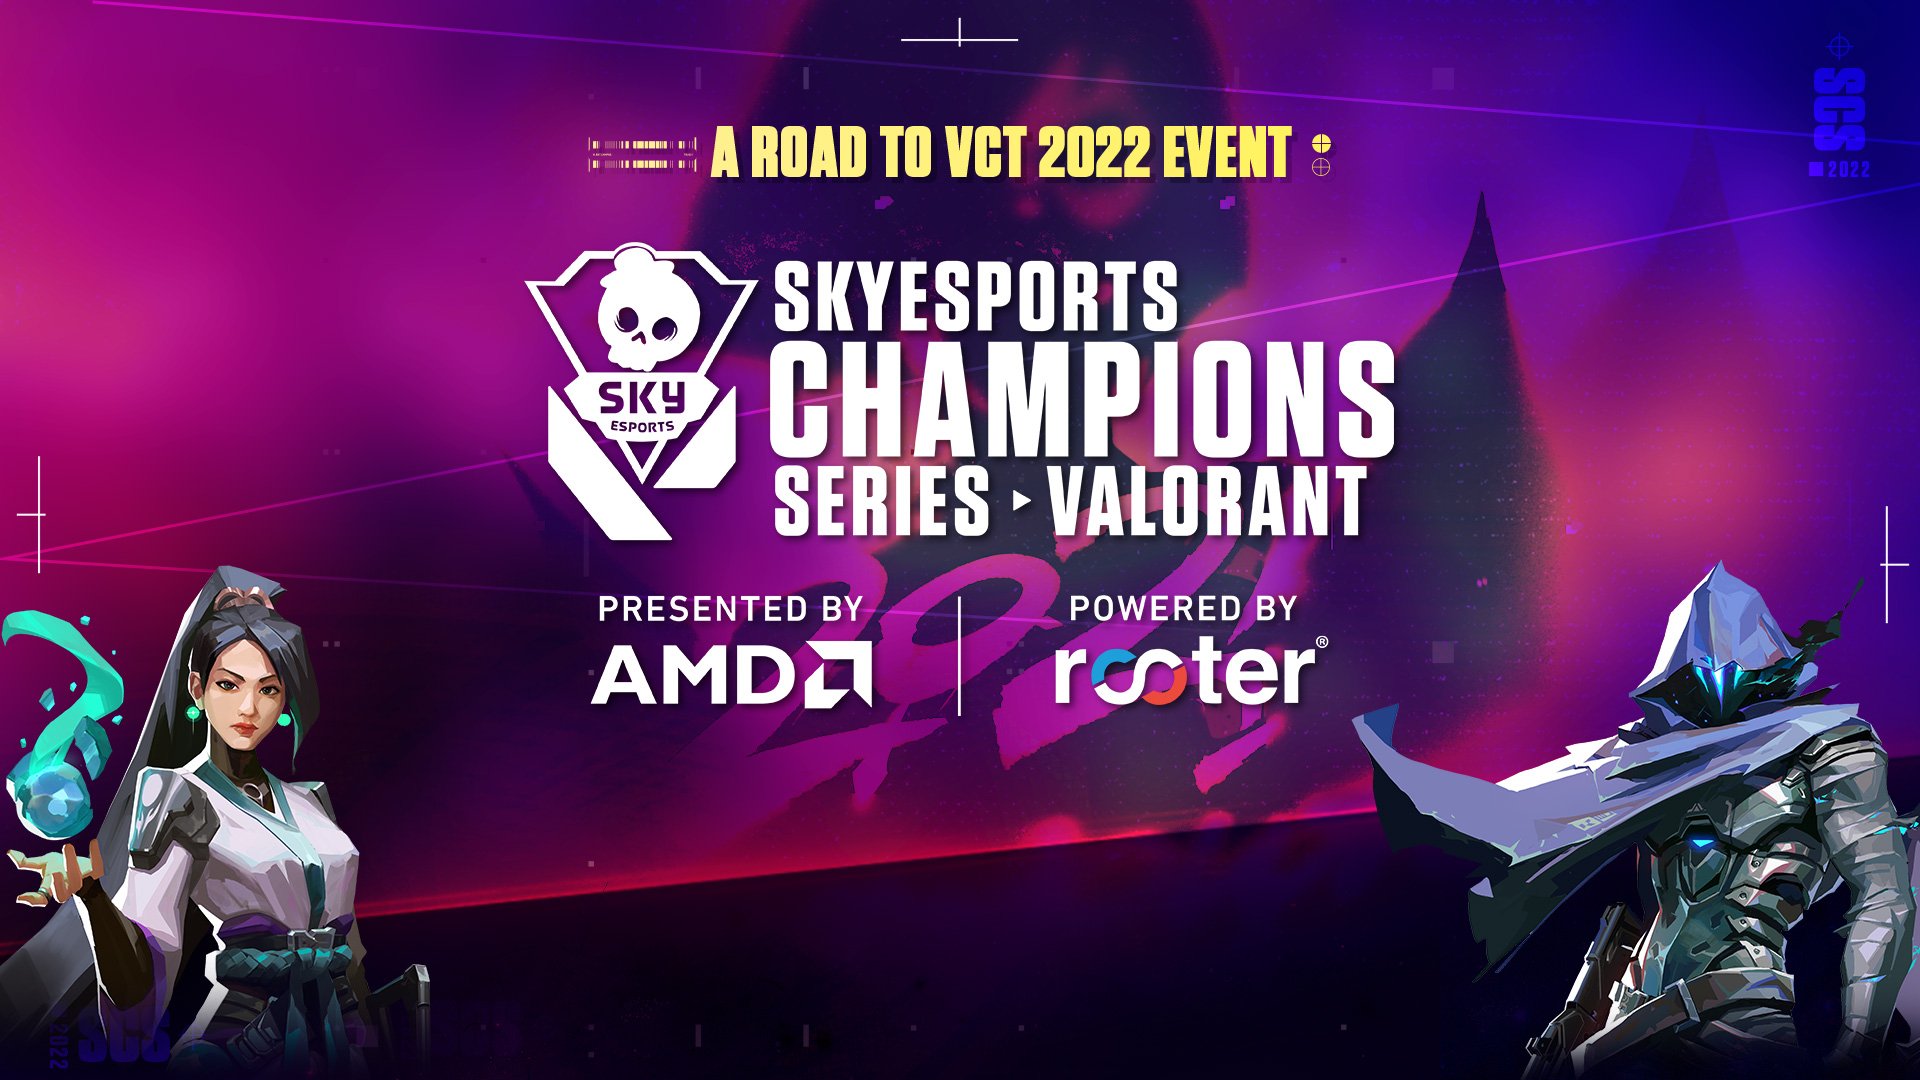 Skyesports partners with AMD and Rooter for VALORANT tournament